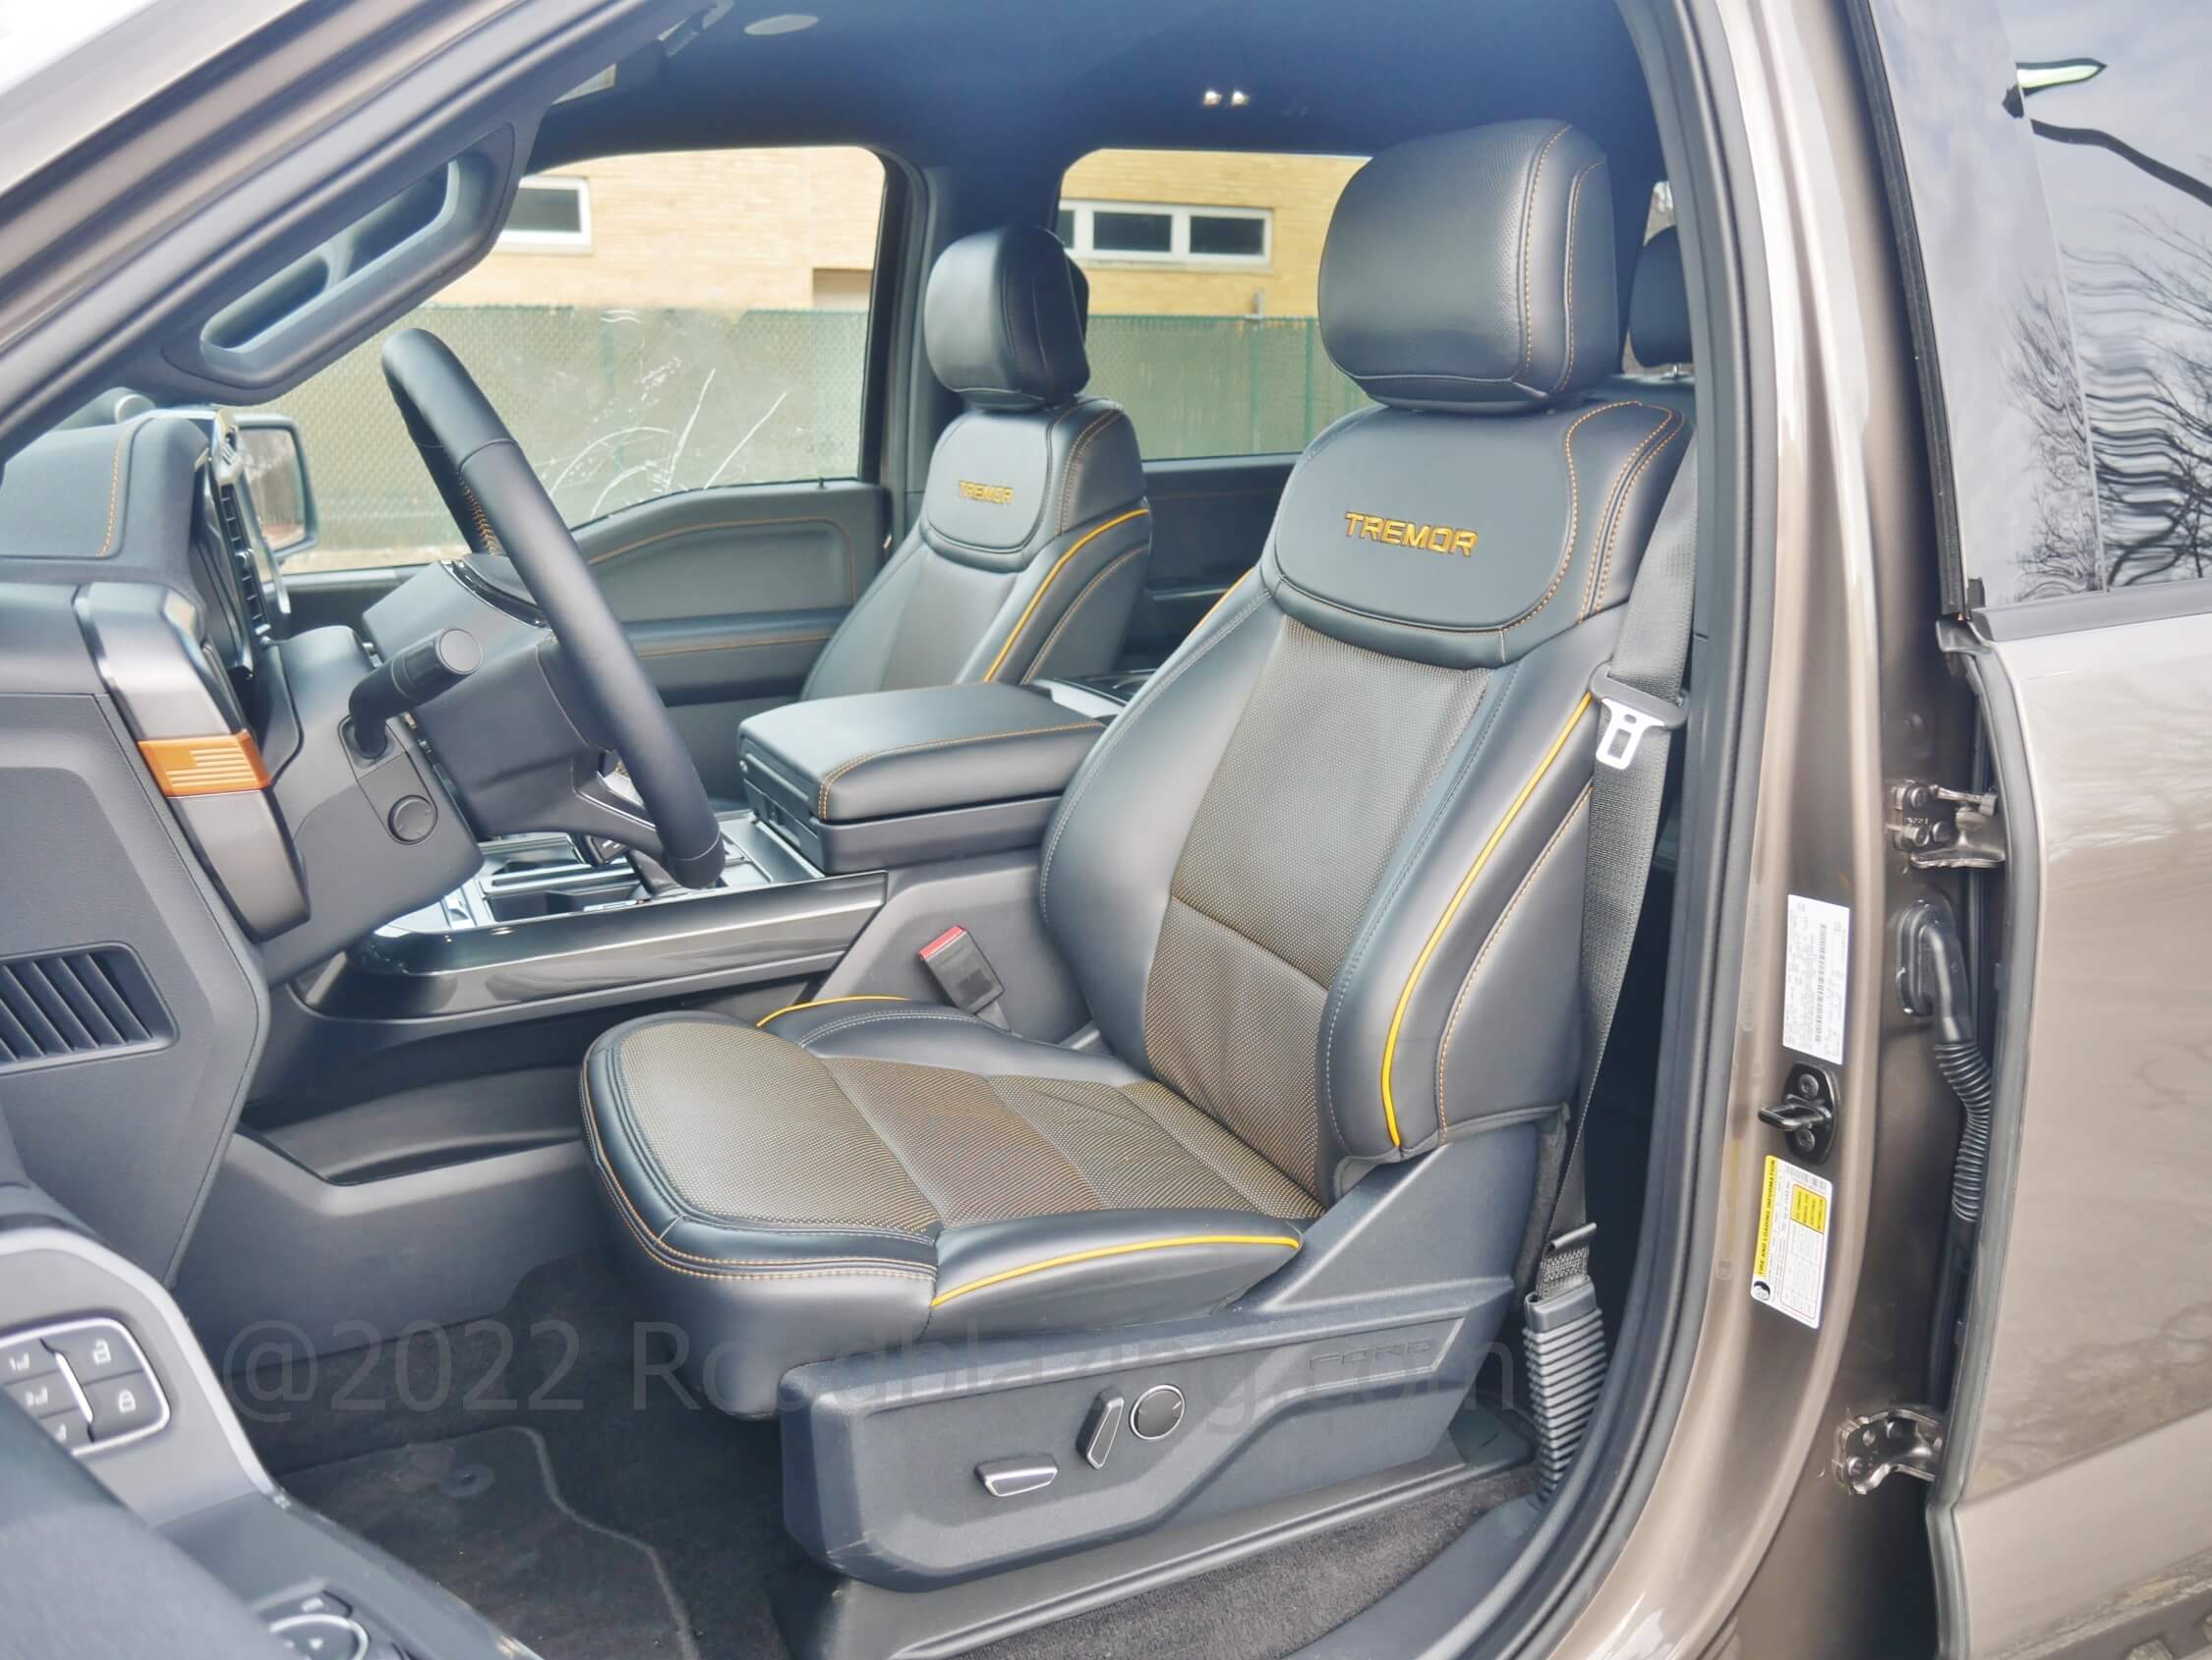 2021 Ford F-150 SuperCrew Tremor 4x4: leather heated & cooled 10-way power adjust front seats, power adjusting heated steering wheel